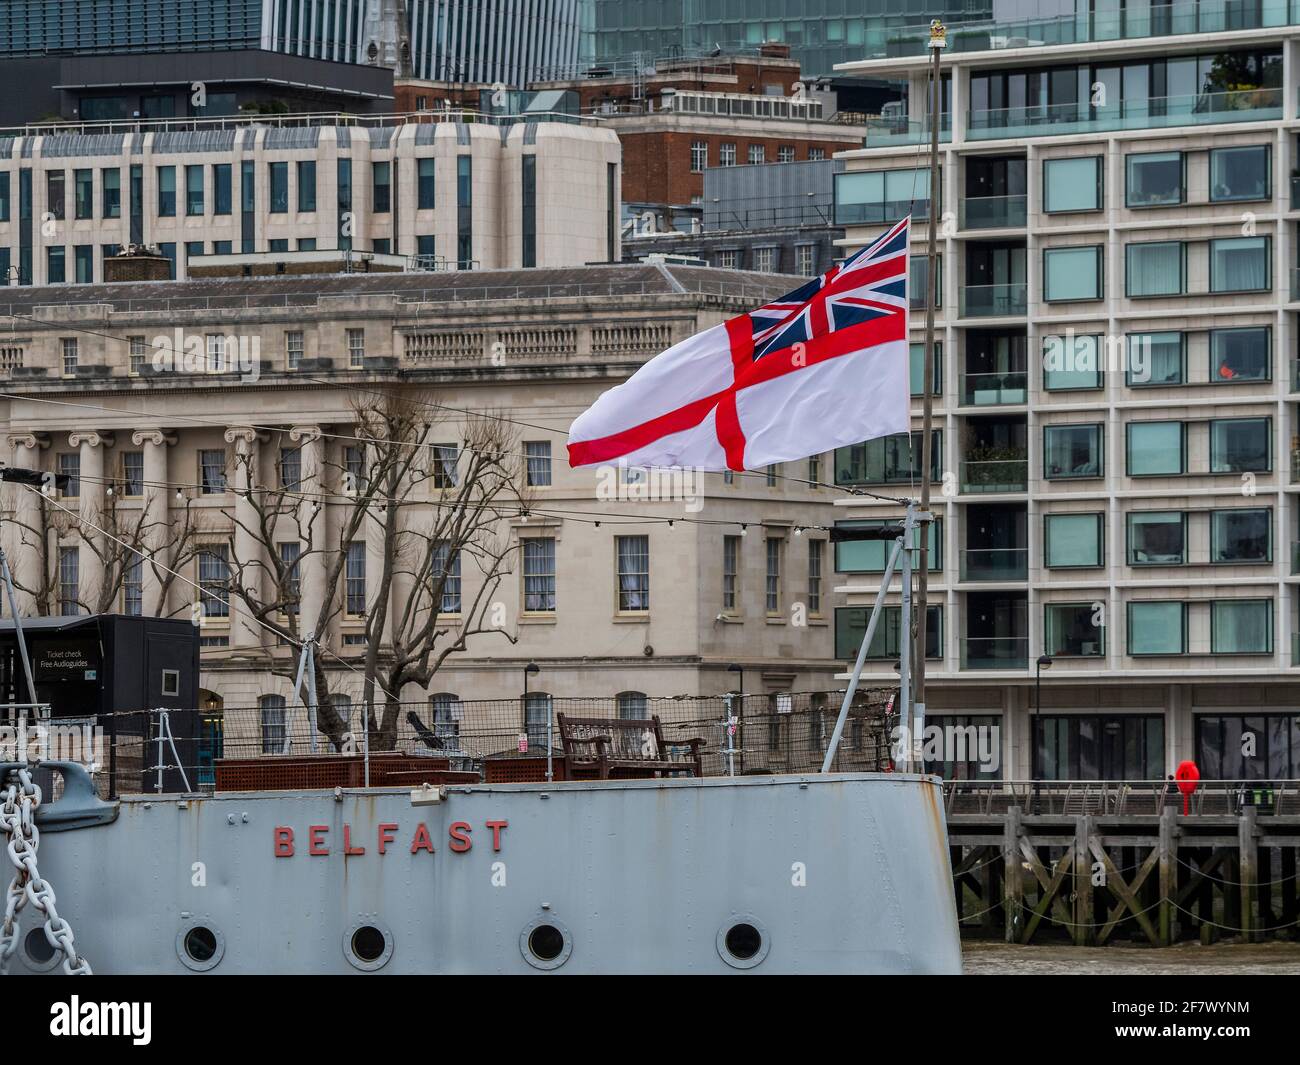 London, UK. 10th Apr, 2021. The White Ensign flies at half mast on HMS Belfast in honour of Prince Philip, Duke of Edinburgh, who died yesterday aged 99. Credit: Guy Bell/Alamy Live News Stock Photo